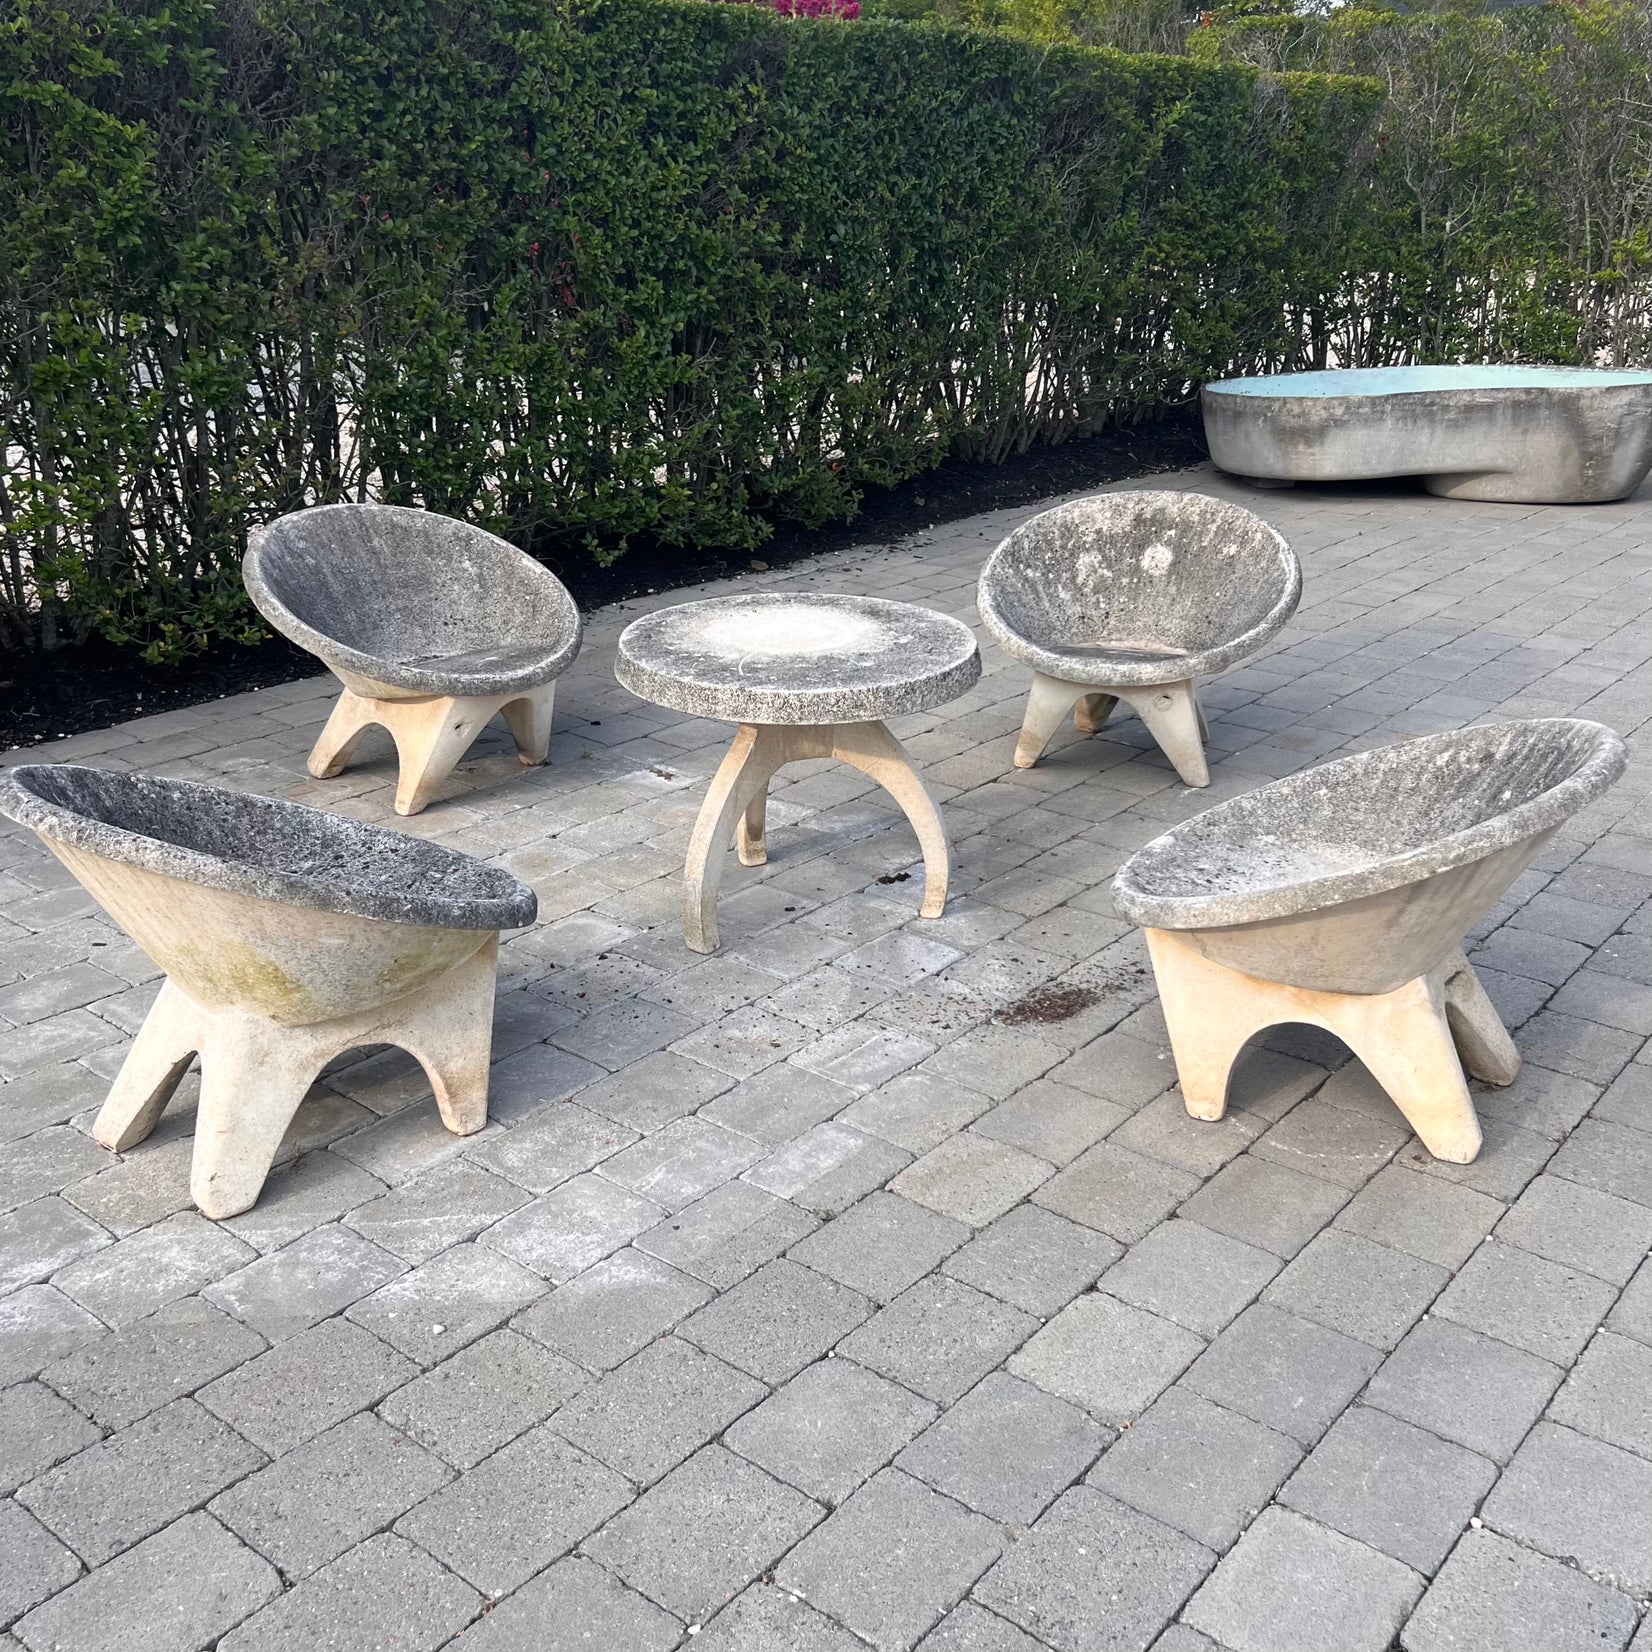 Set of 4 Sculptural Concrete Chairs and Table, 1960s Belgium